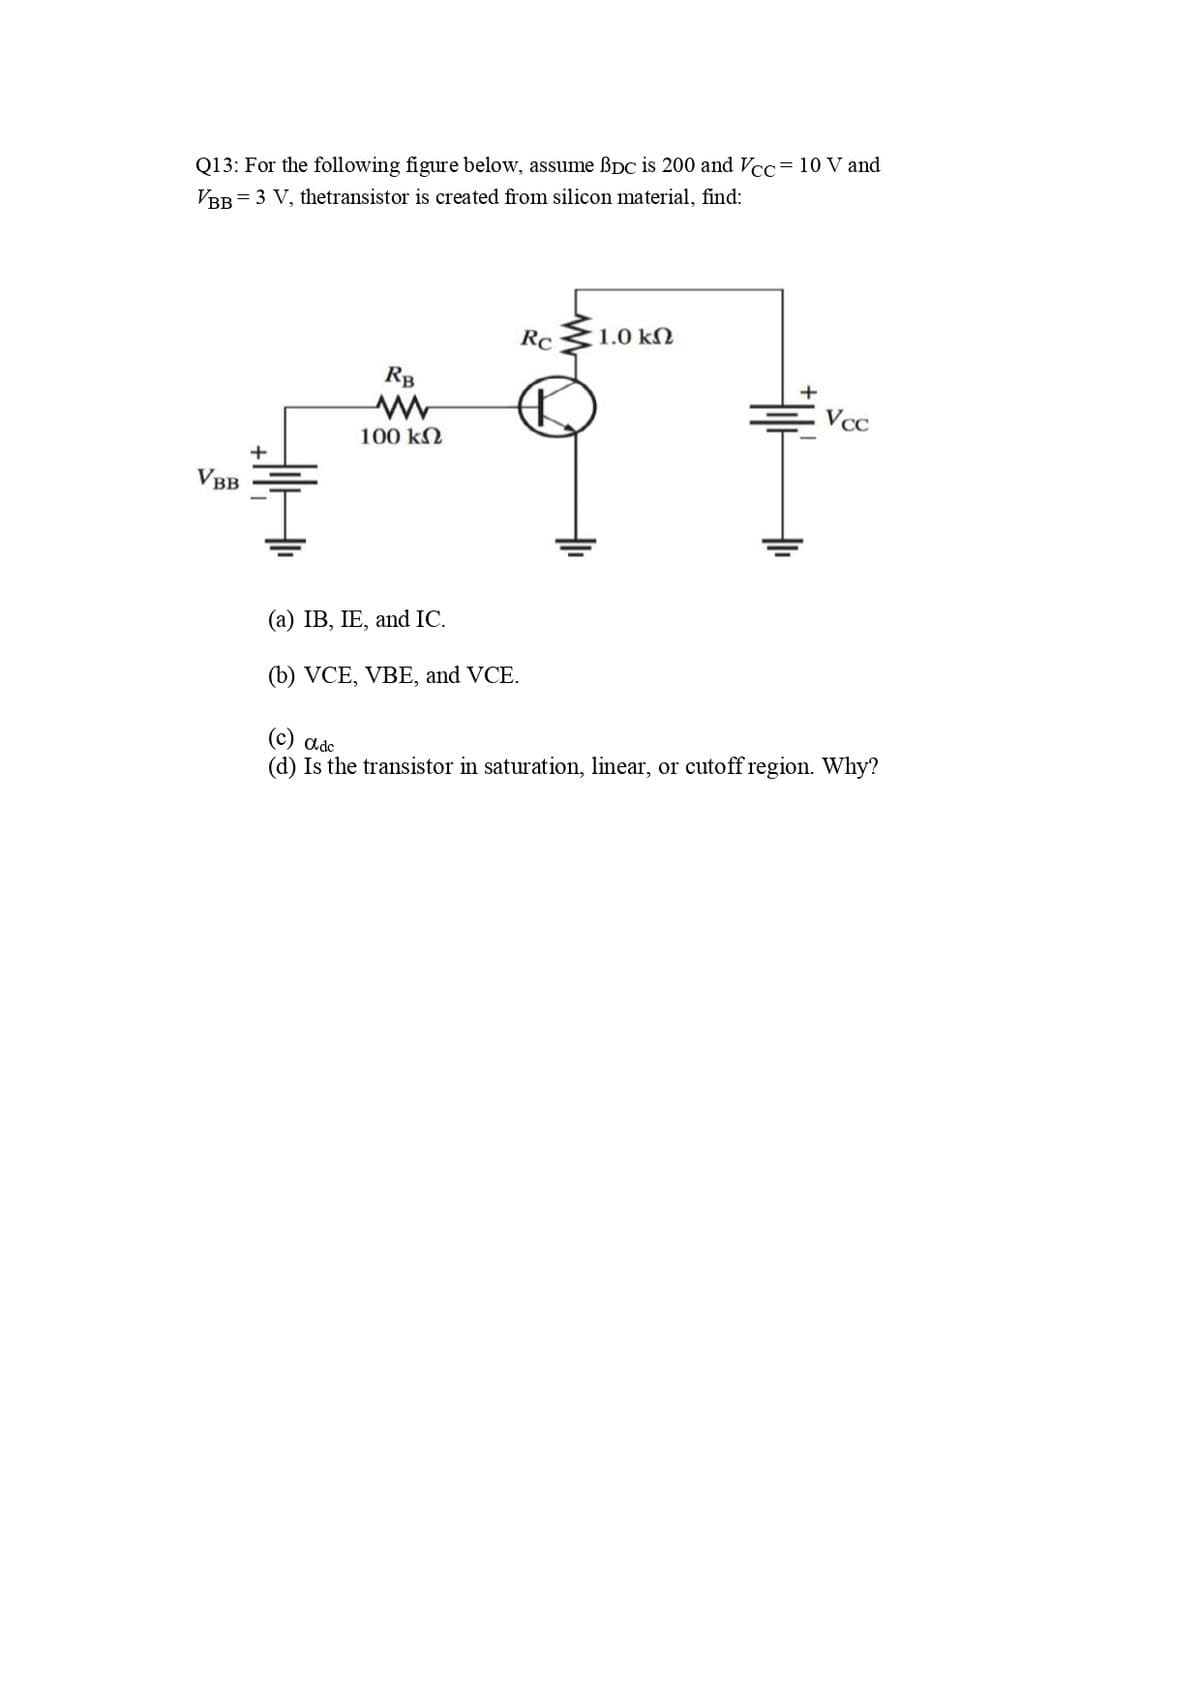 Q13: For the following figure below, assume ßDc is 200 and Vcc= 10 V and
VBB = 3 V, thetransistor is created from silicon material, find:
Rc
1.0 kN
RB
Vcc
100 kN
VBB
(а) IB, IE, and IC.
(b) VCE, VBE, and VCE.
(c) adc
(d) Is the transistor in saturation, linear, or cutoff region. Why?
